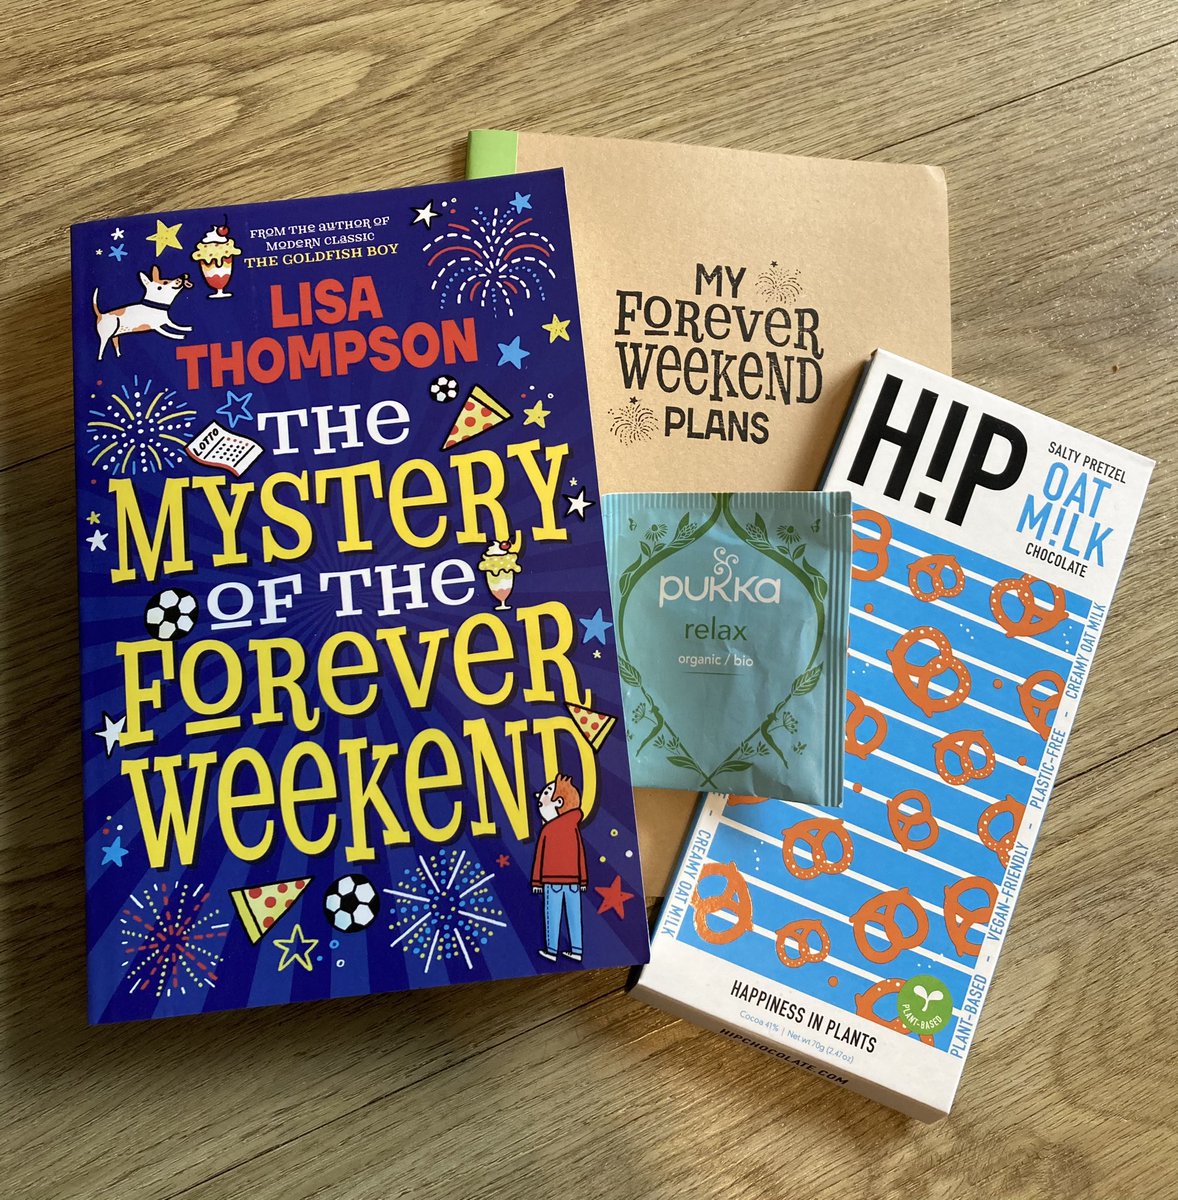 As an exhausted teacher, the idea of a forever weekend is very appealing. Huge thanks to @scholasticuk for this teacher care package which includes the latest book by the fabulous Lisa Thompson. 

#bookpost #bookblogger #childrensfiction #primaryschoolteachers